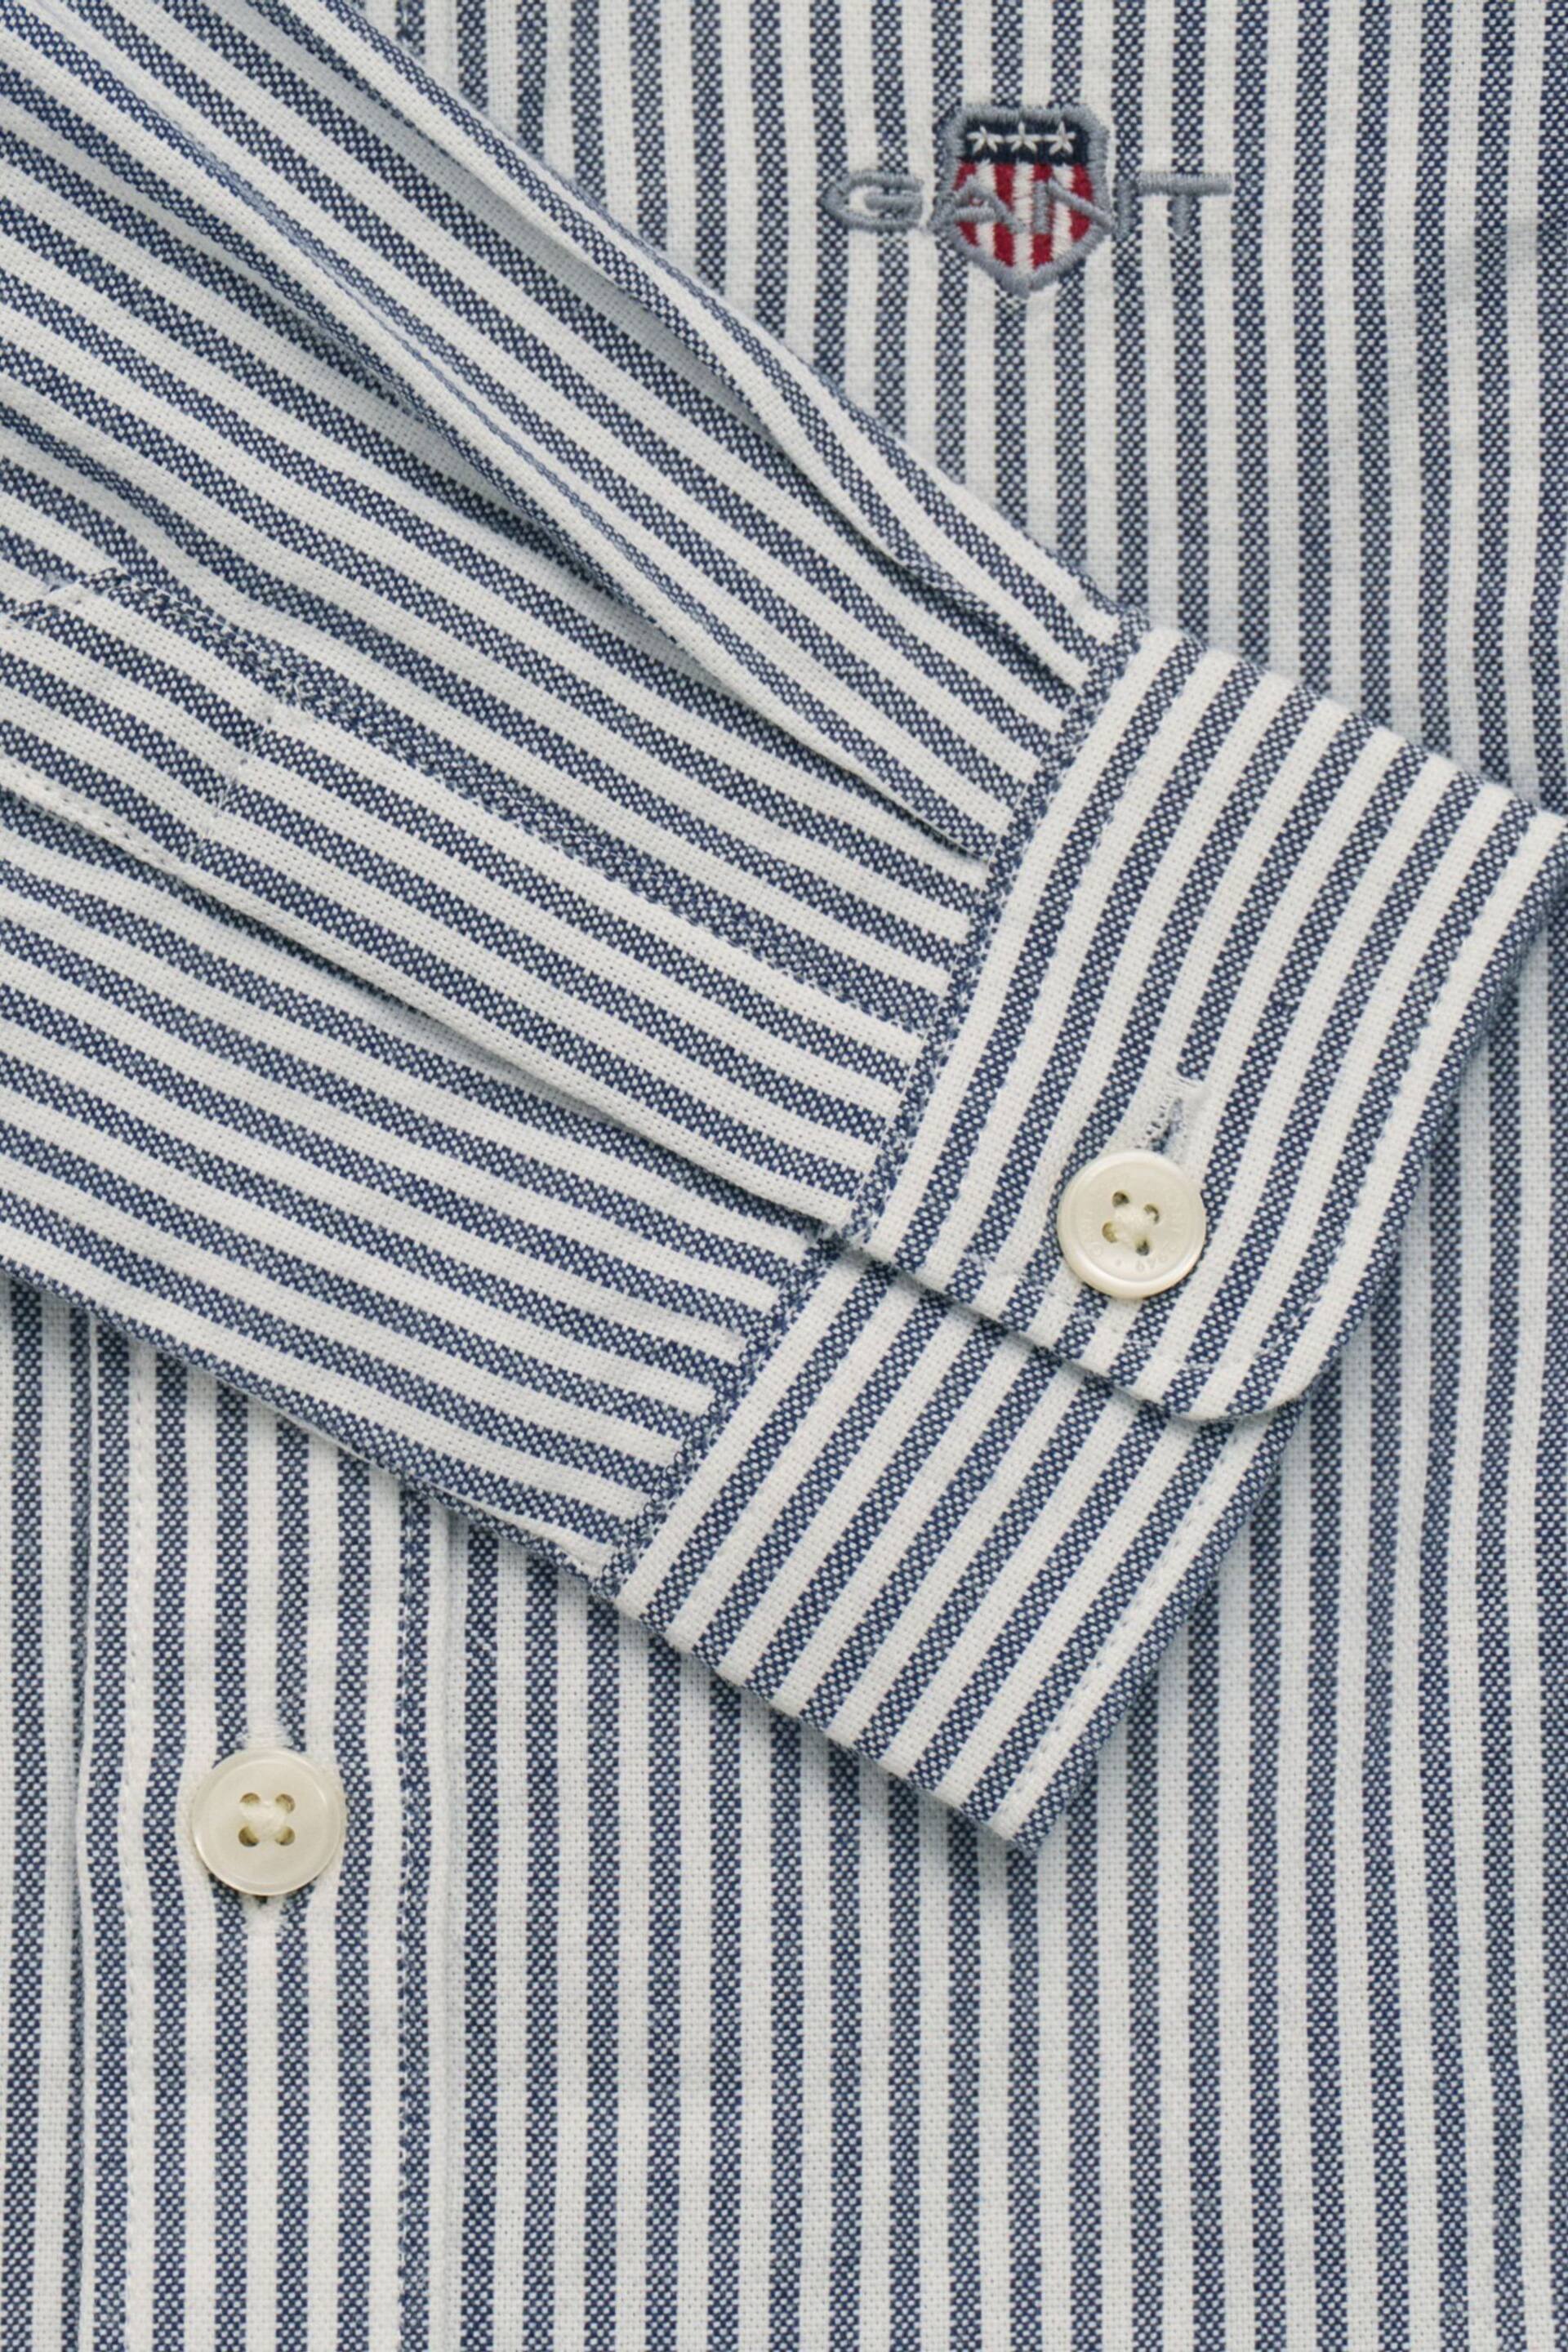 GANT Baby Blue Striped Oxford Shirt - Image 2 of 3